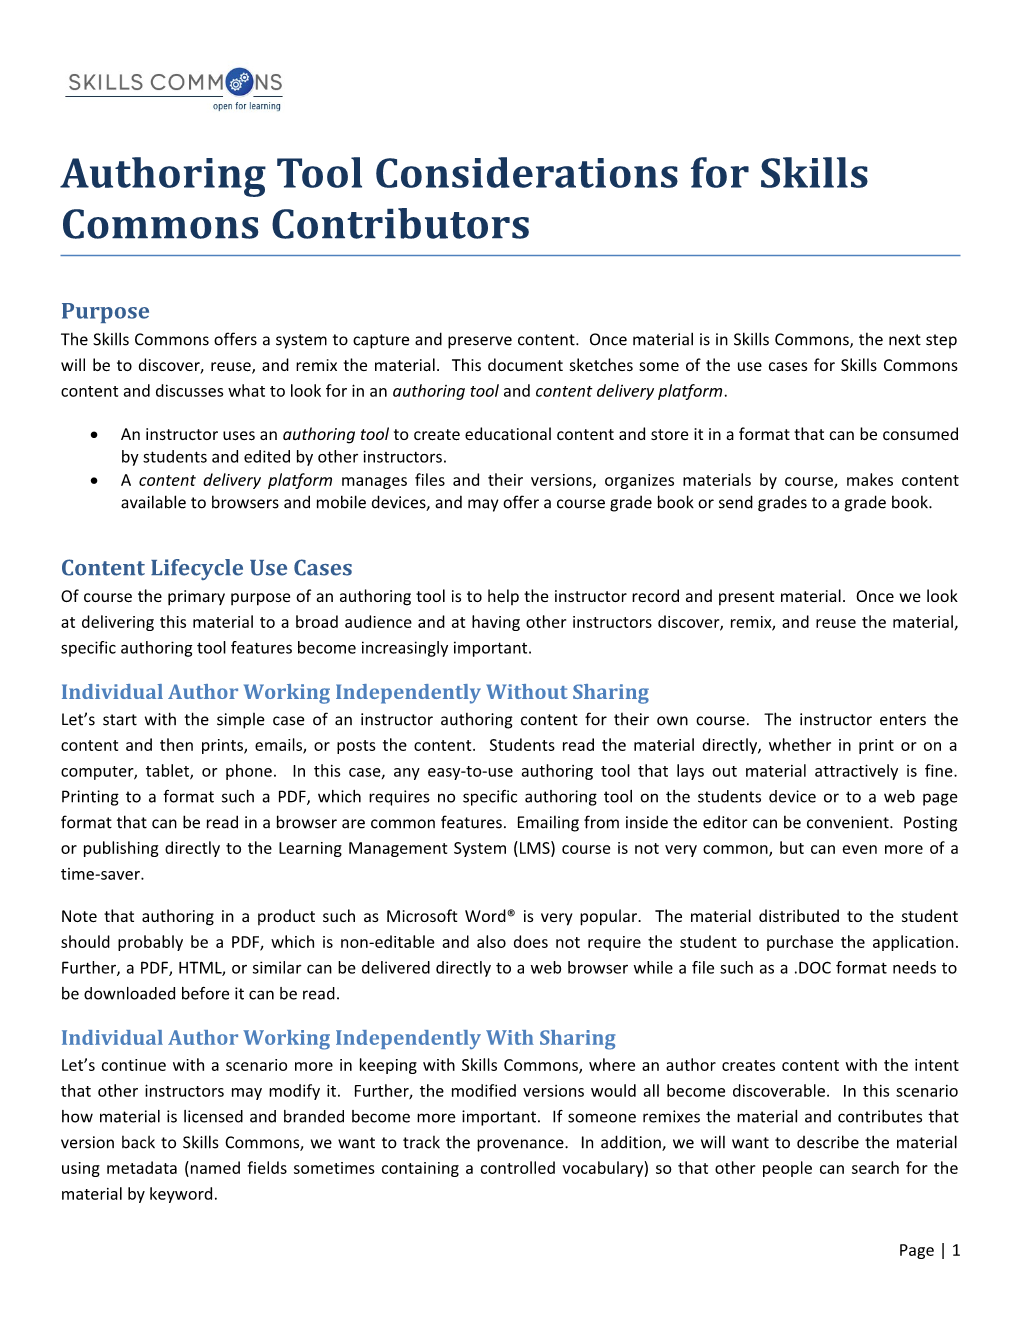 Authoring Tool Considerations for Skills Commons Contributors